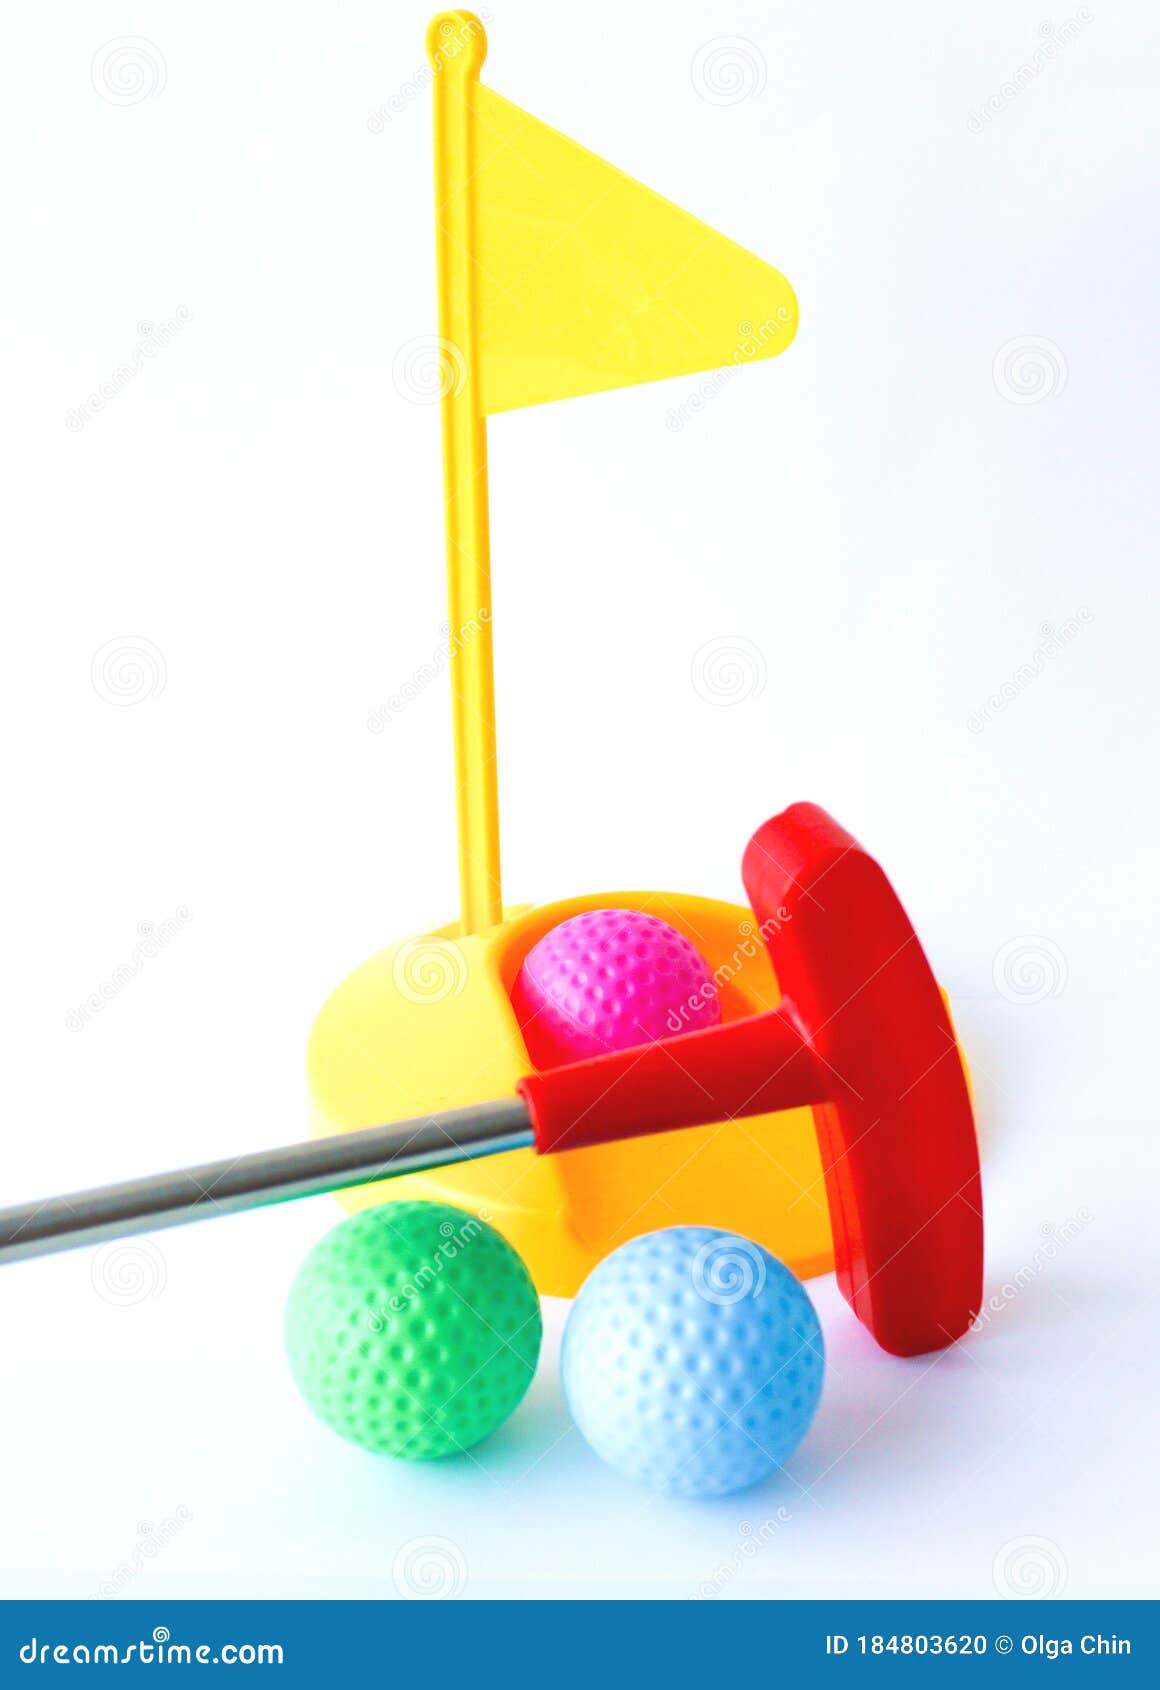 Home Golf For Games At Home Stock Photo Image Of Green Childrens 184803620